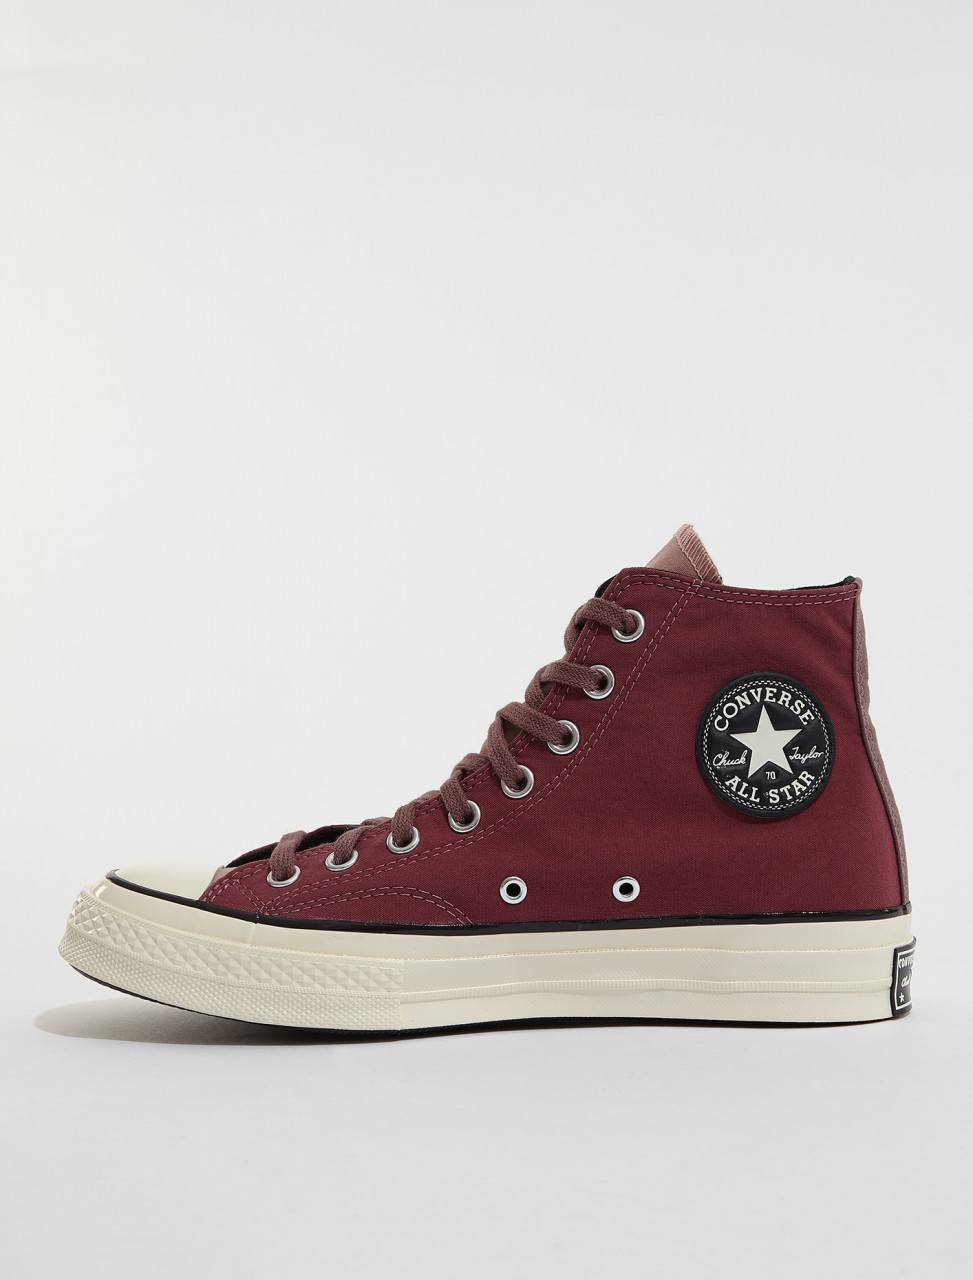 Converse Chuck 70 Hi 'Plant Colour' Sneaker in Rose Taupe | Voo Store ...